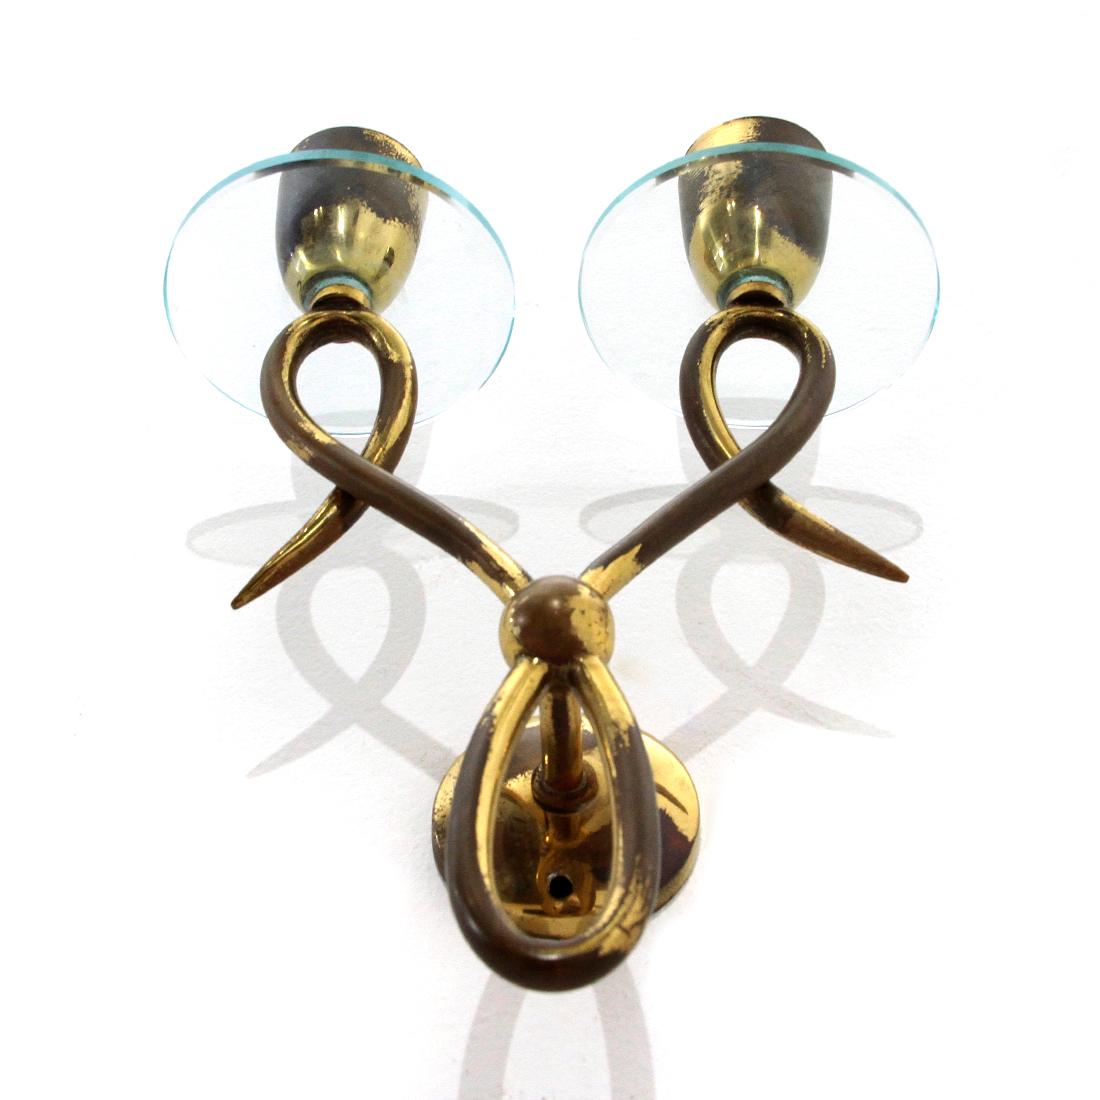 Pair of Midcentury Brass and Glass Italian Wall Lamps, 1950s For Sale 3